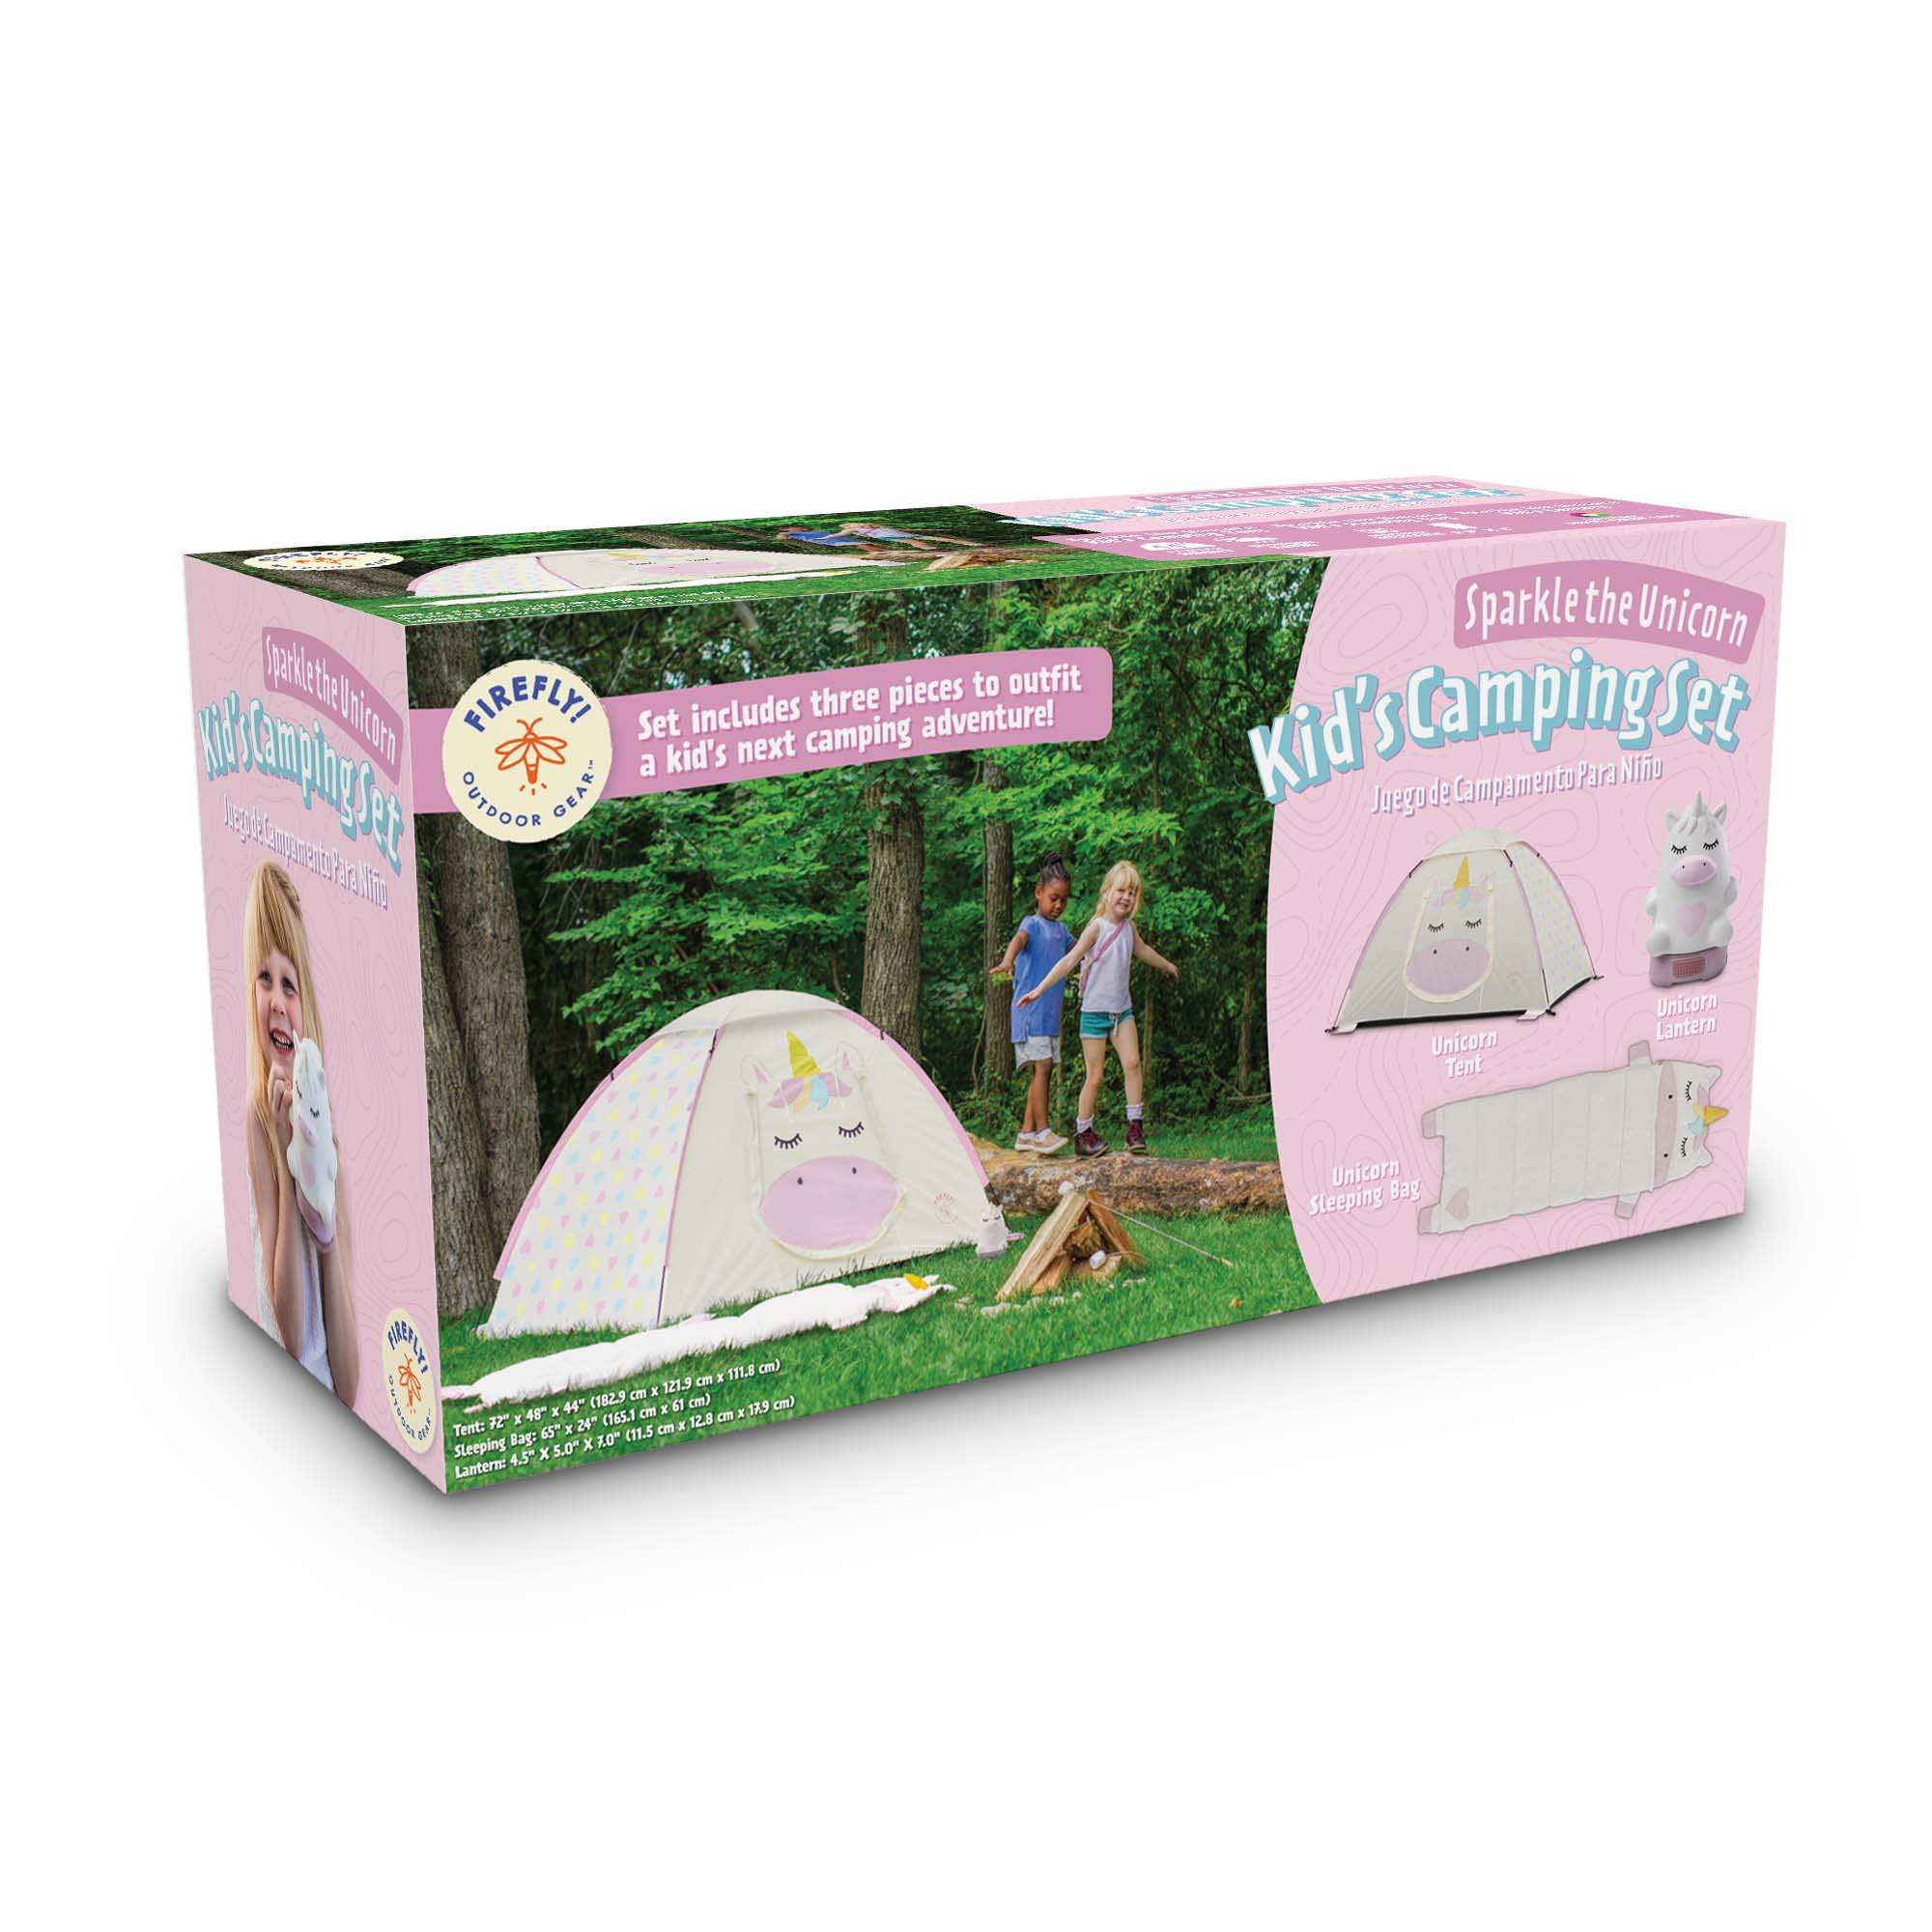 Firefly! Outdoor Gear Sparkle the Unicorn Kid's Camping Combo (One-room Tent, Sleeping Bag, Lantern) - image 4 of 28